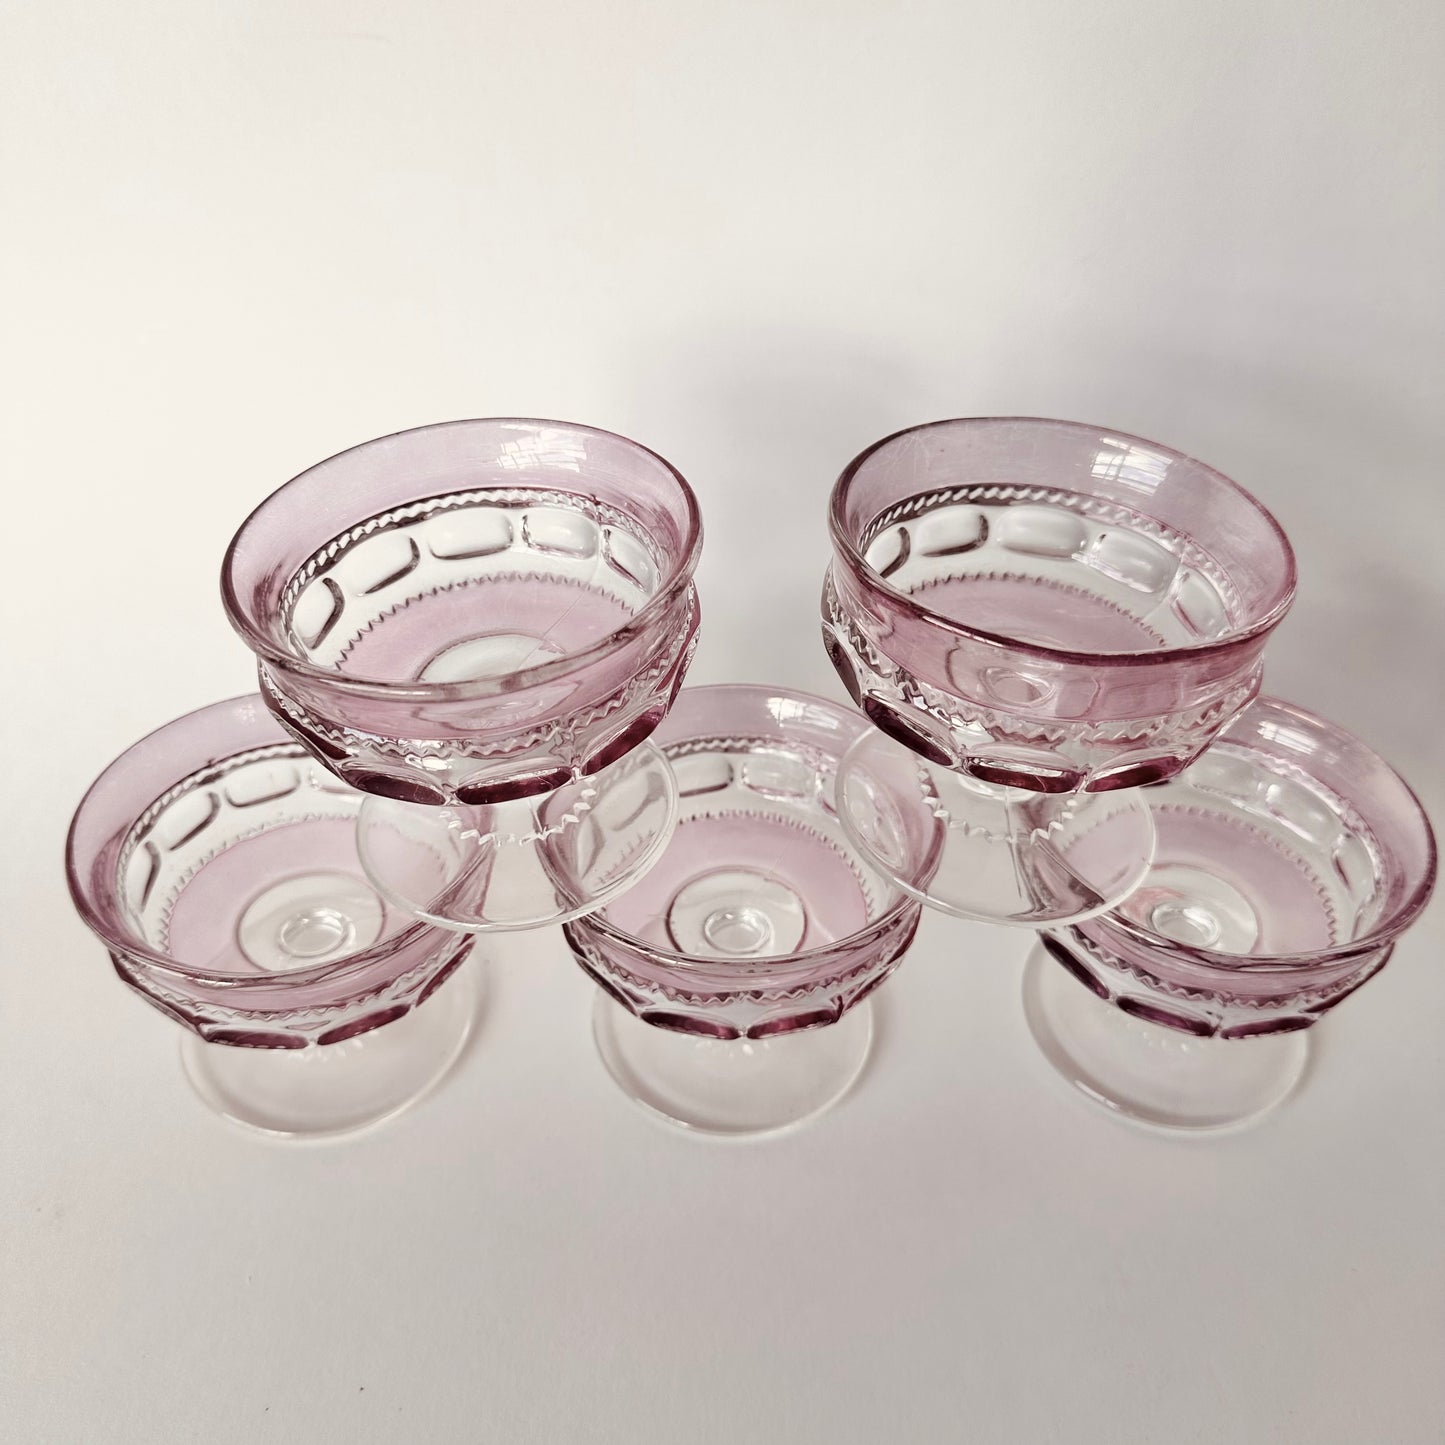 SET OF 5 PINK RUBY SORBET COMPOTE GLASSES